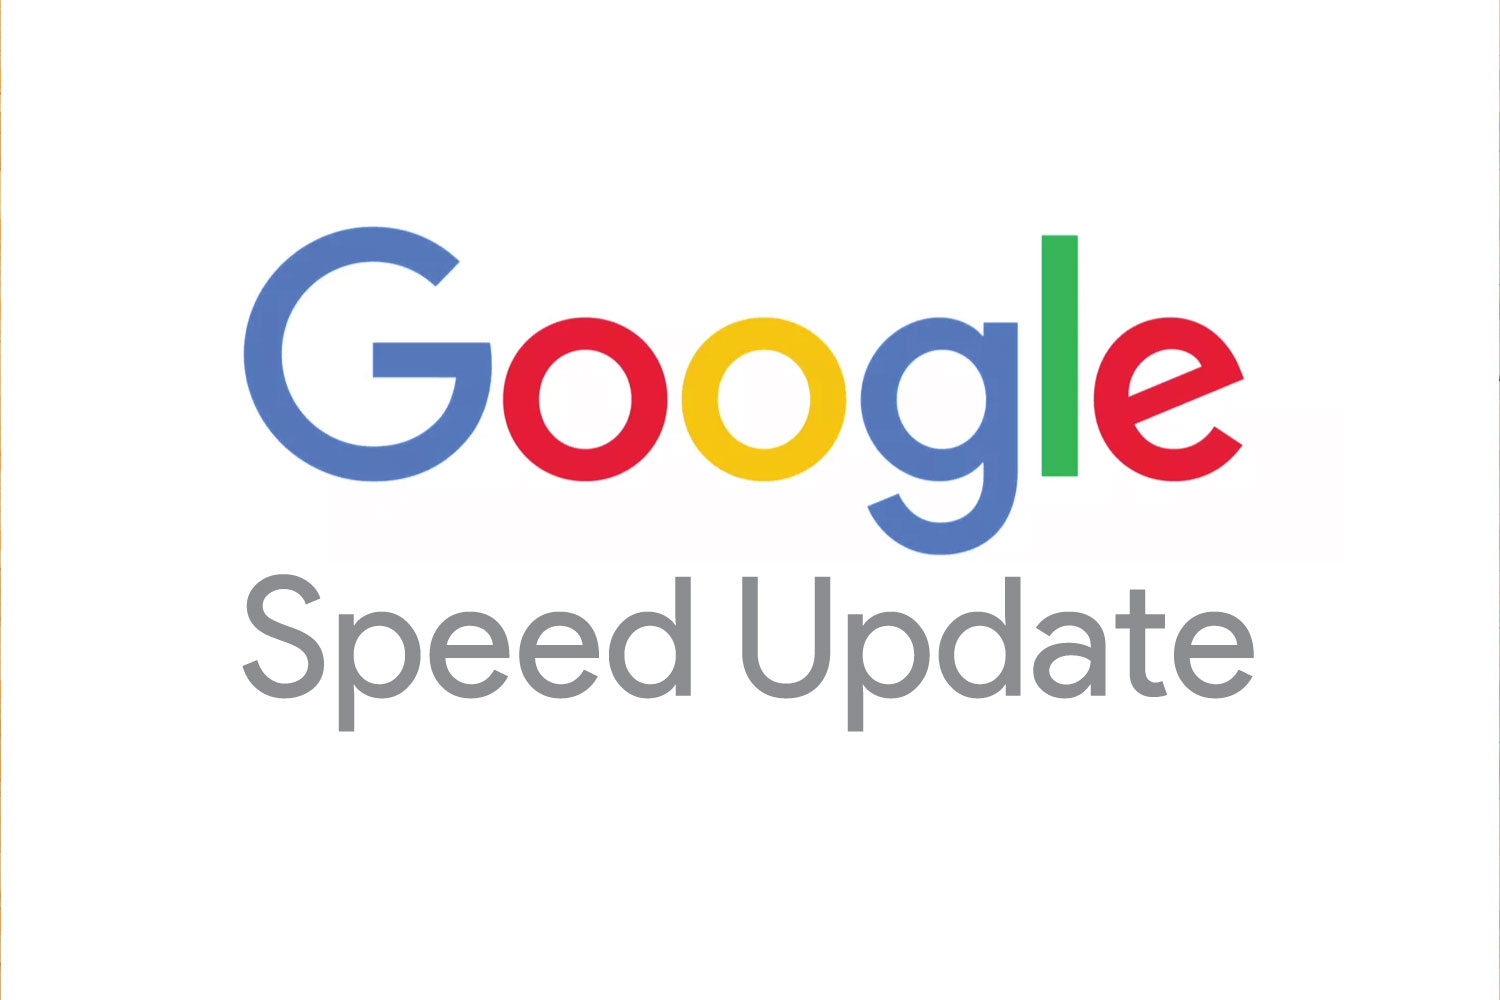 Is your site ready for the upcoming Google mobile “Speed Update”?